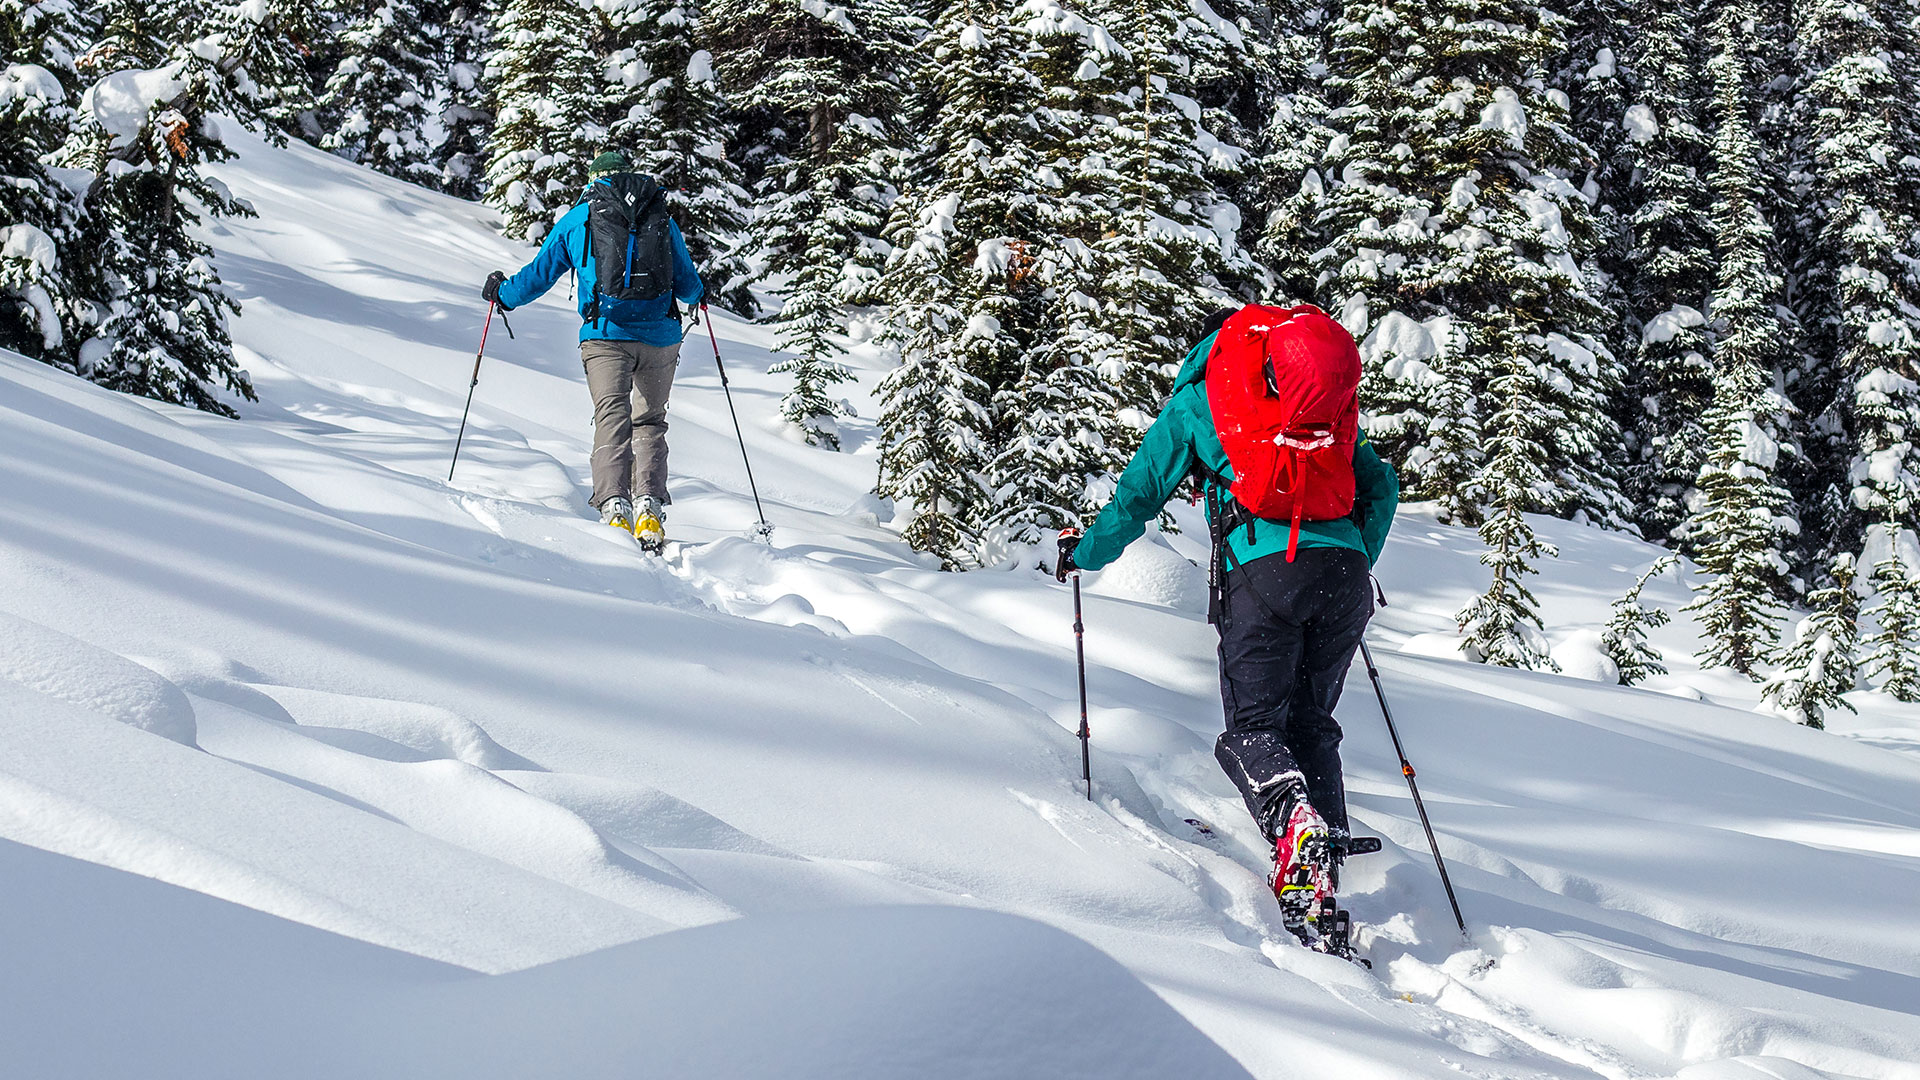 A Guide For Your First Backcountry Skiing & Snowboarding Tour